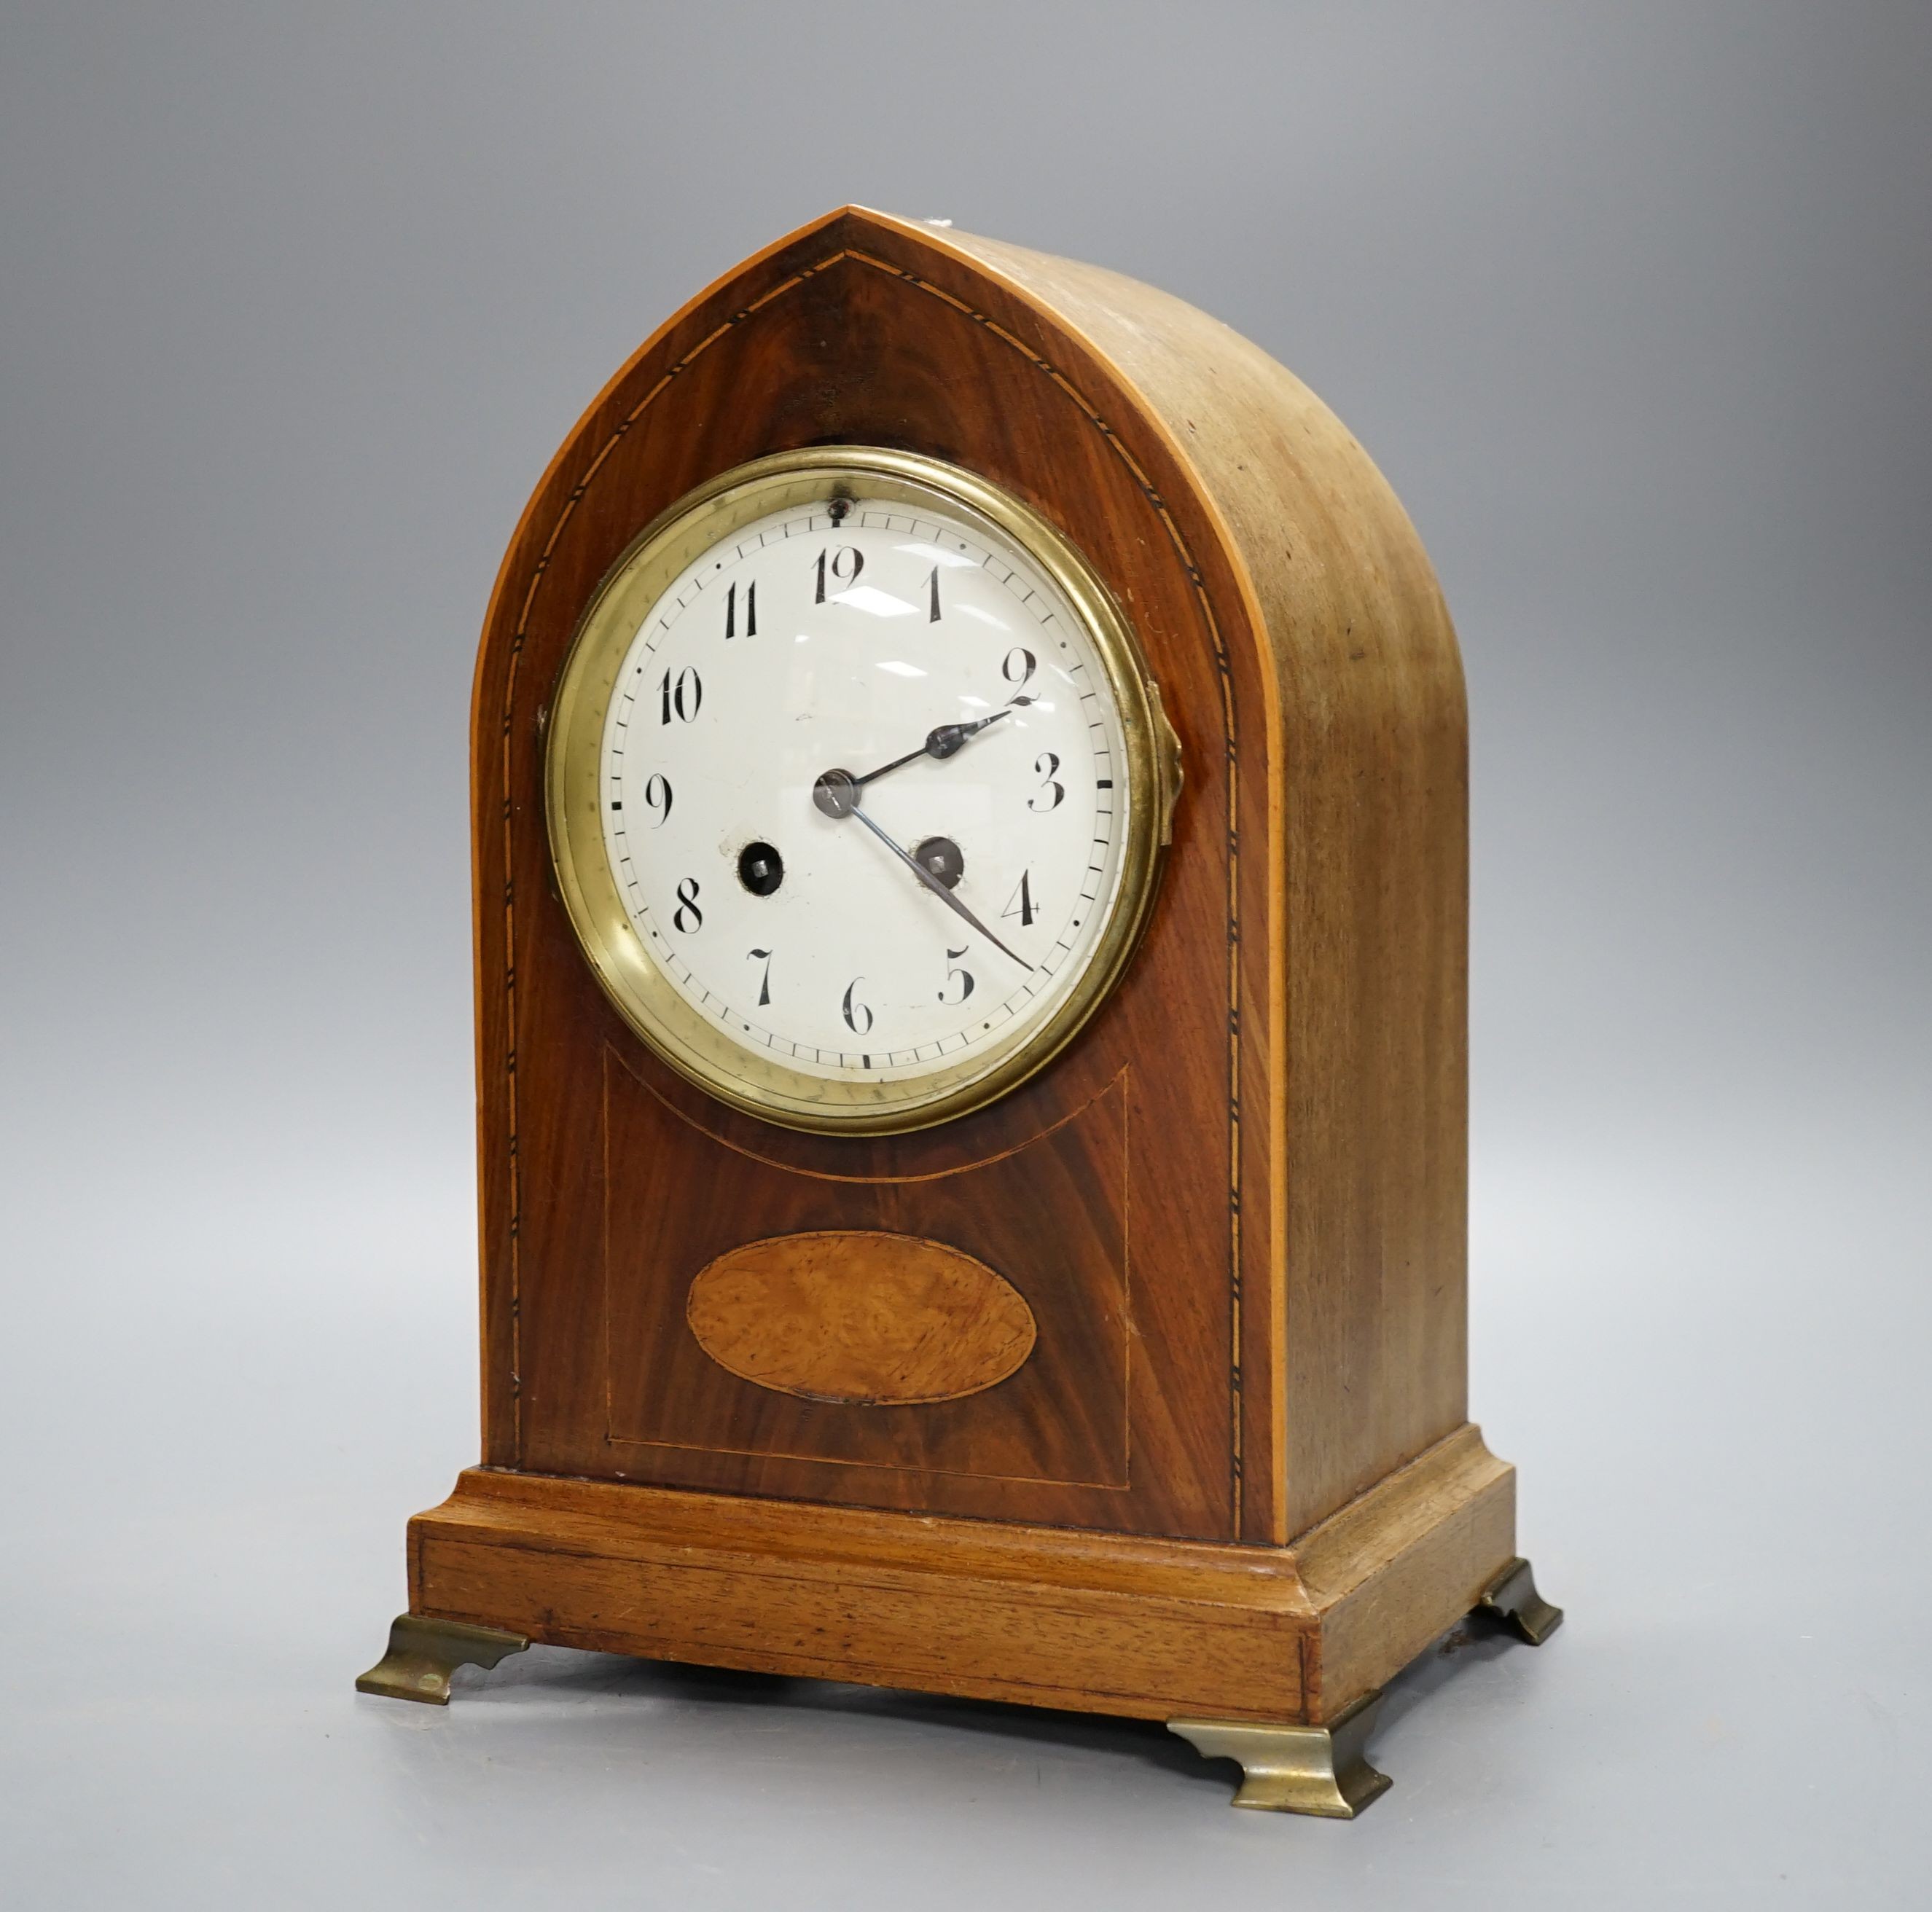 An Edwardian mahogany mantel clock, lancet top case, with white enamelled dial. Key and pendulum. 29cm